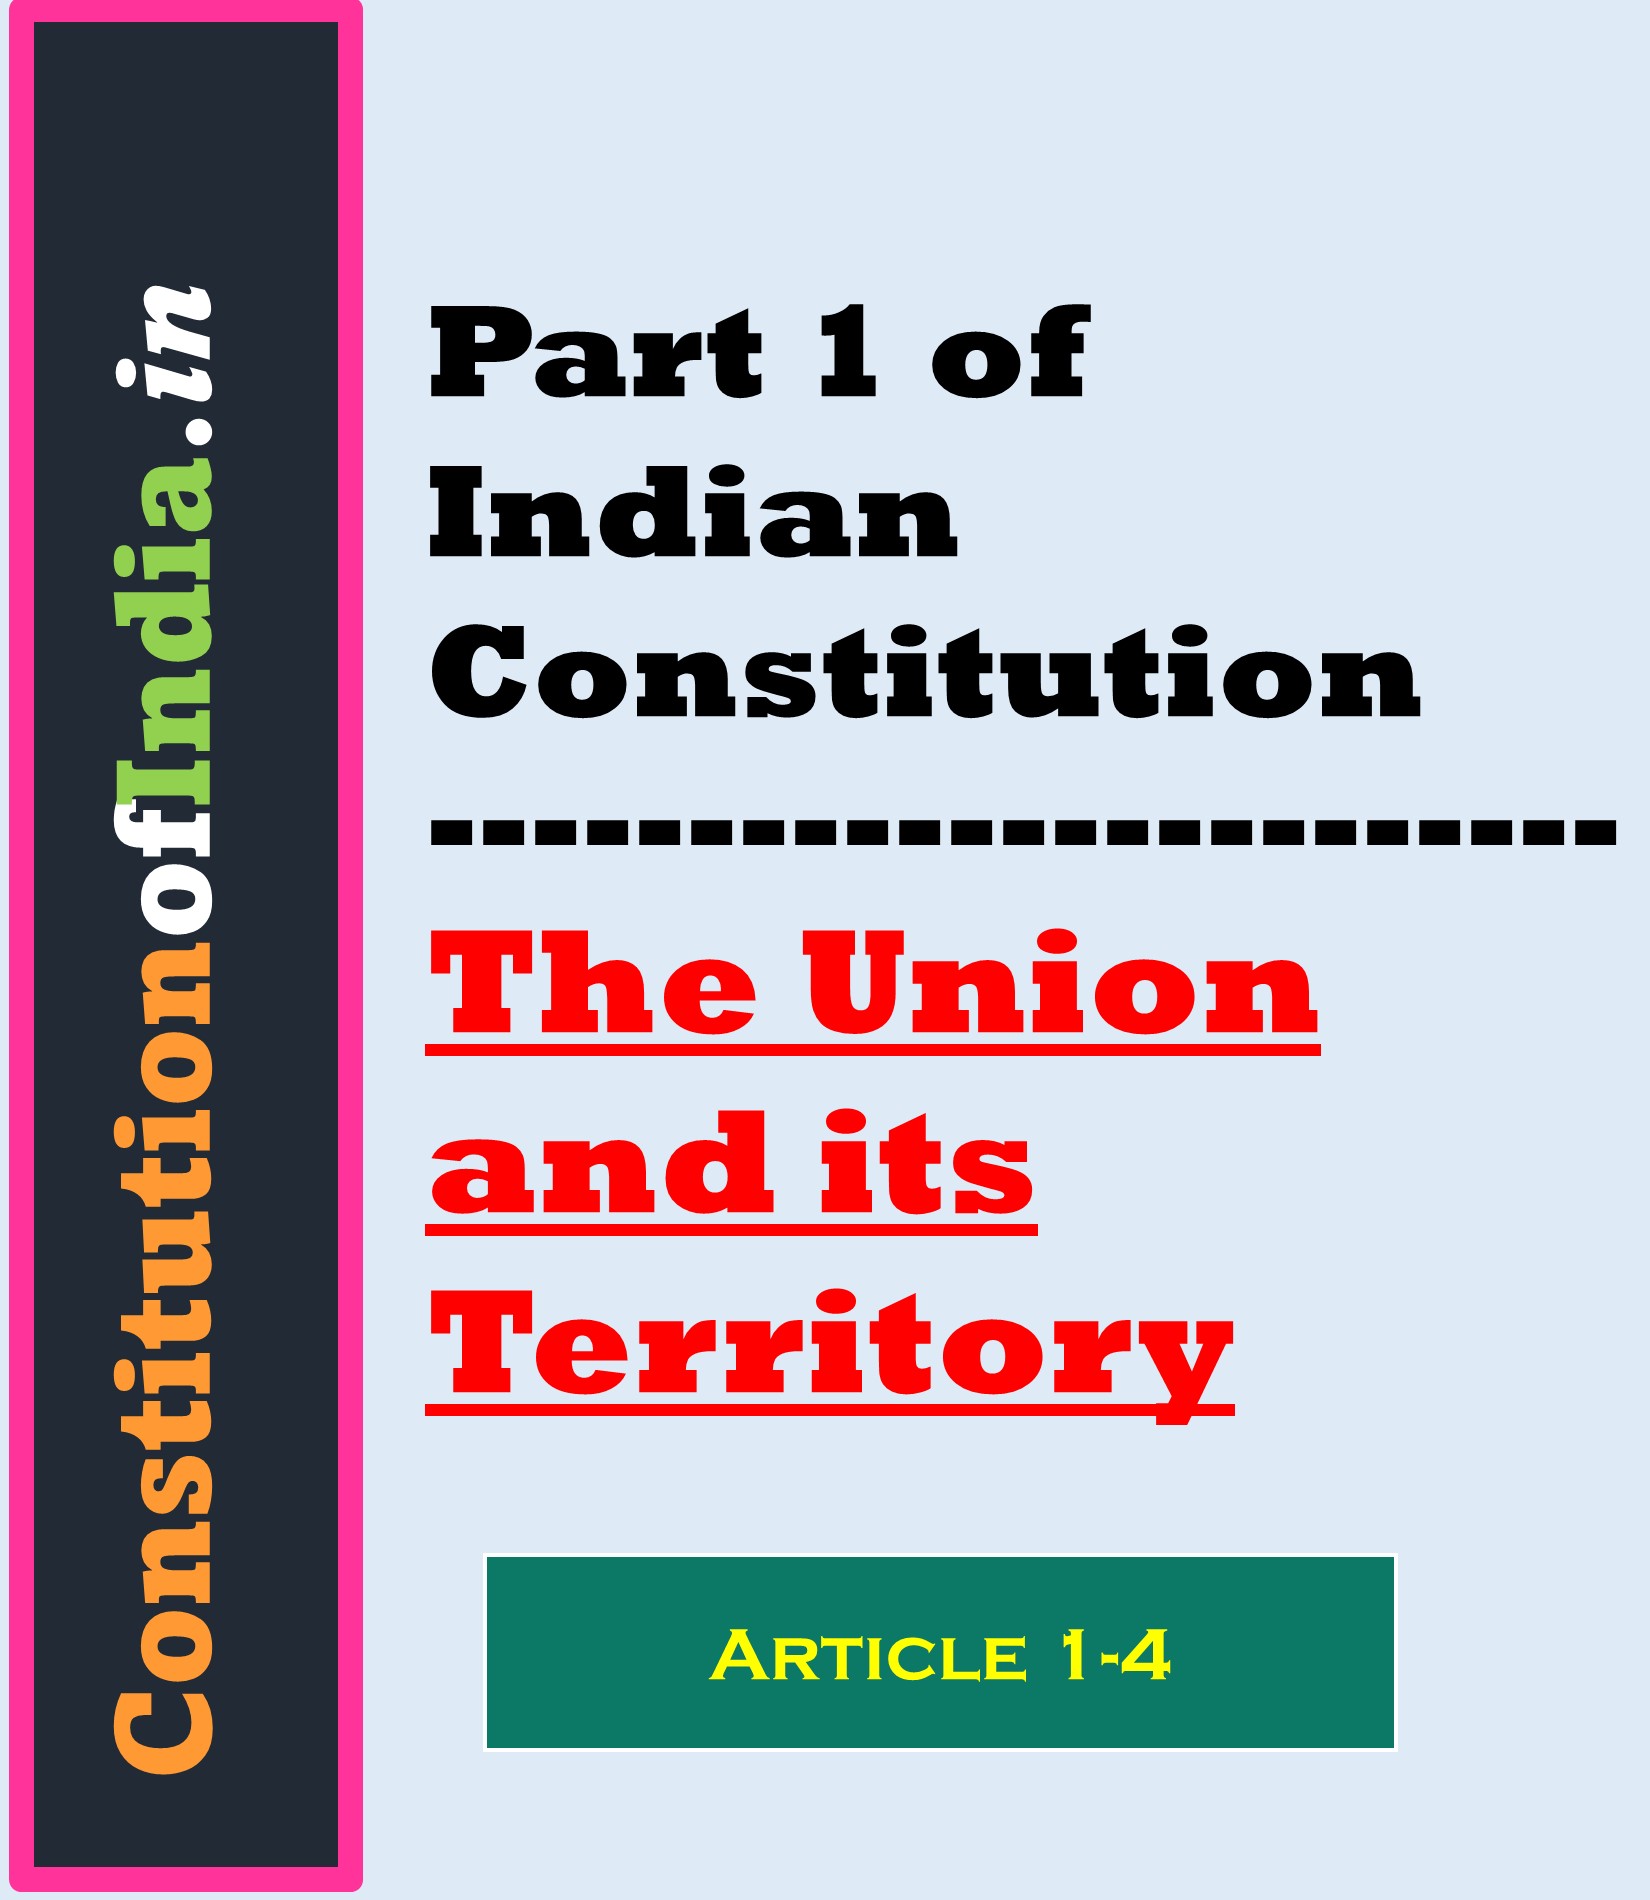 PART 1 OF INDIAN CONSTITUTION